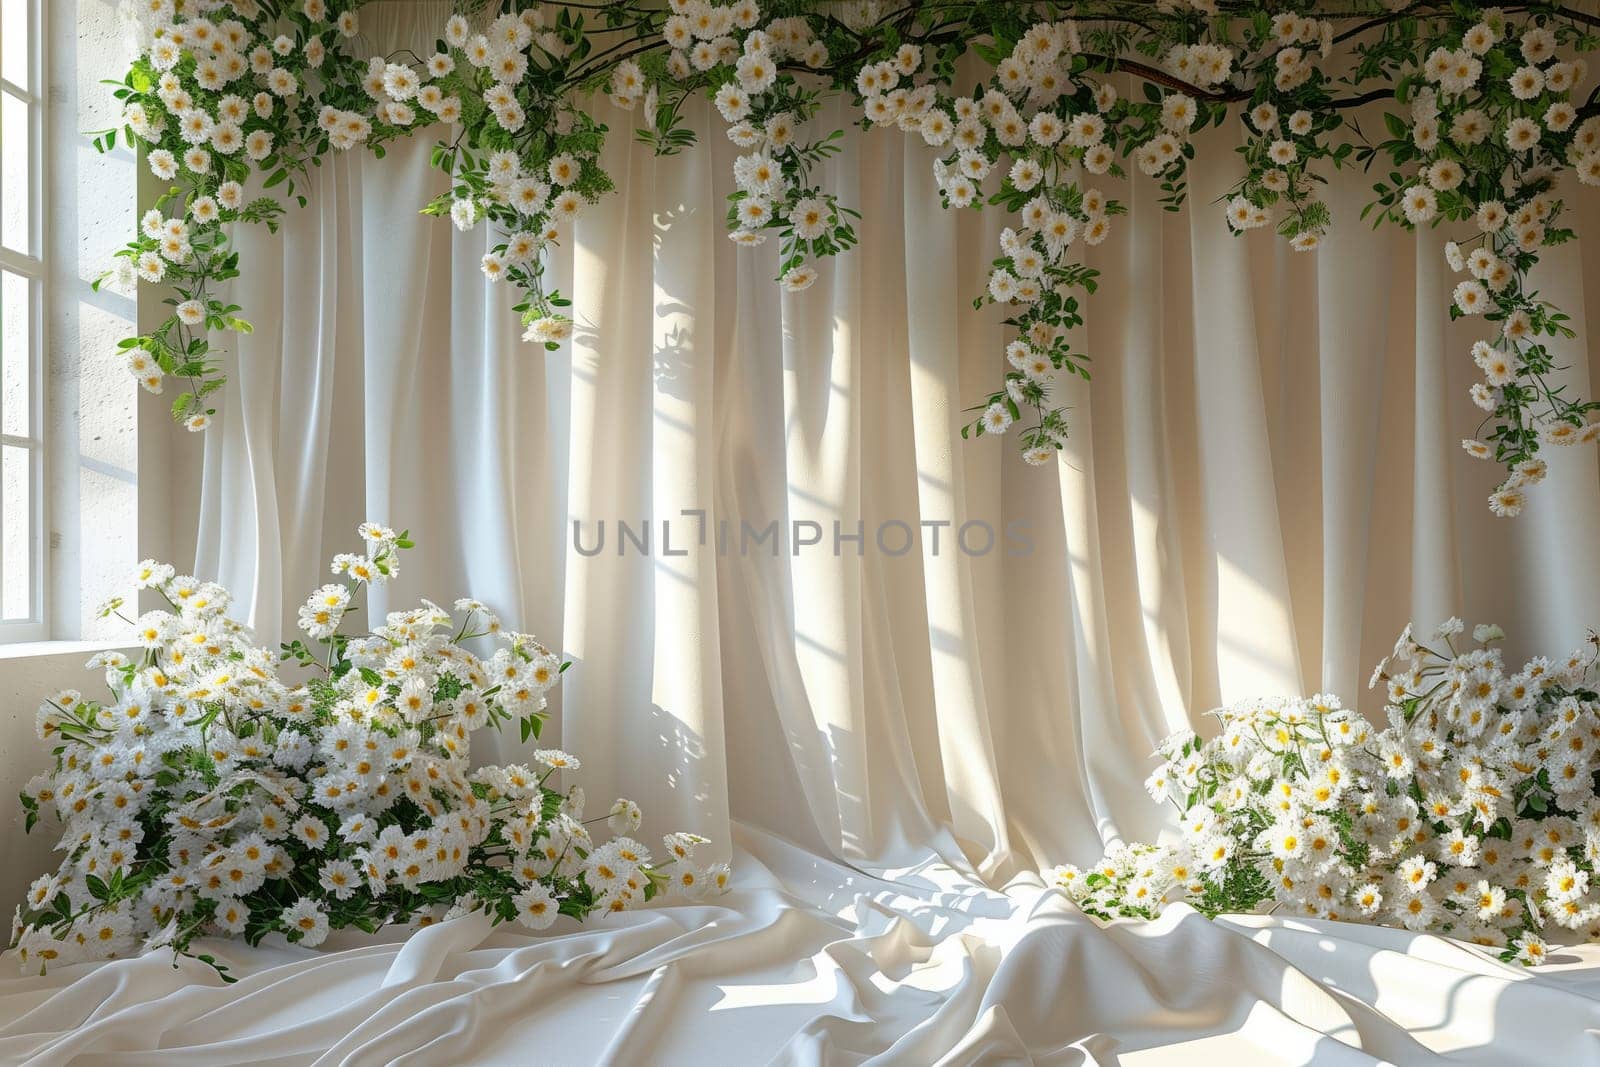 A serene room filled with white curtains and flowers hanging from the ceiling, creating a peaceful atmosphere with natural elements